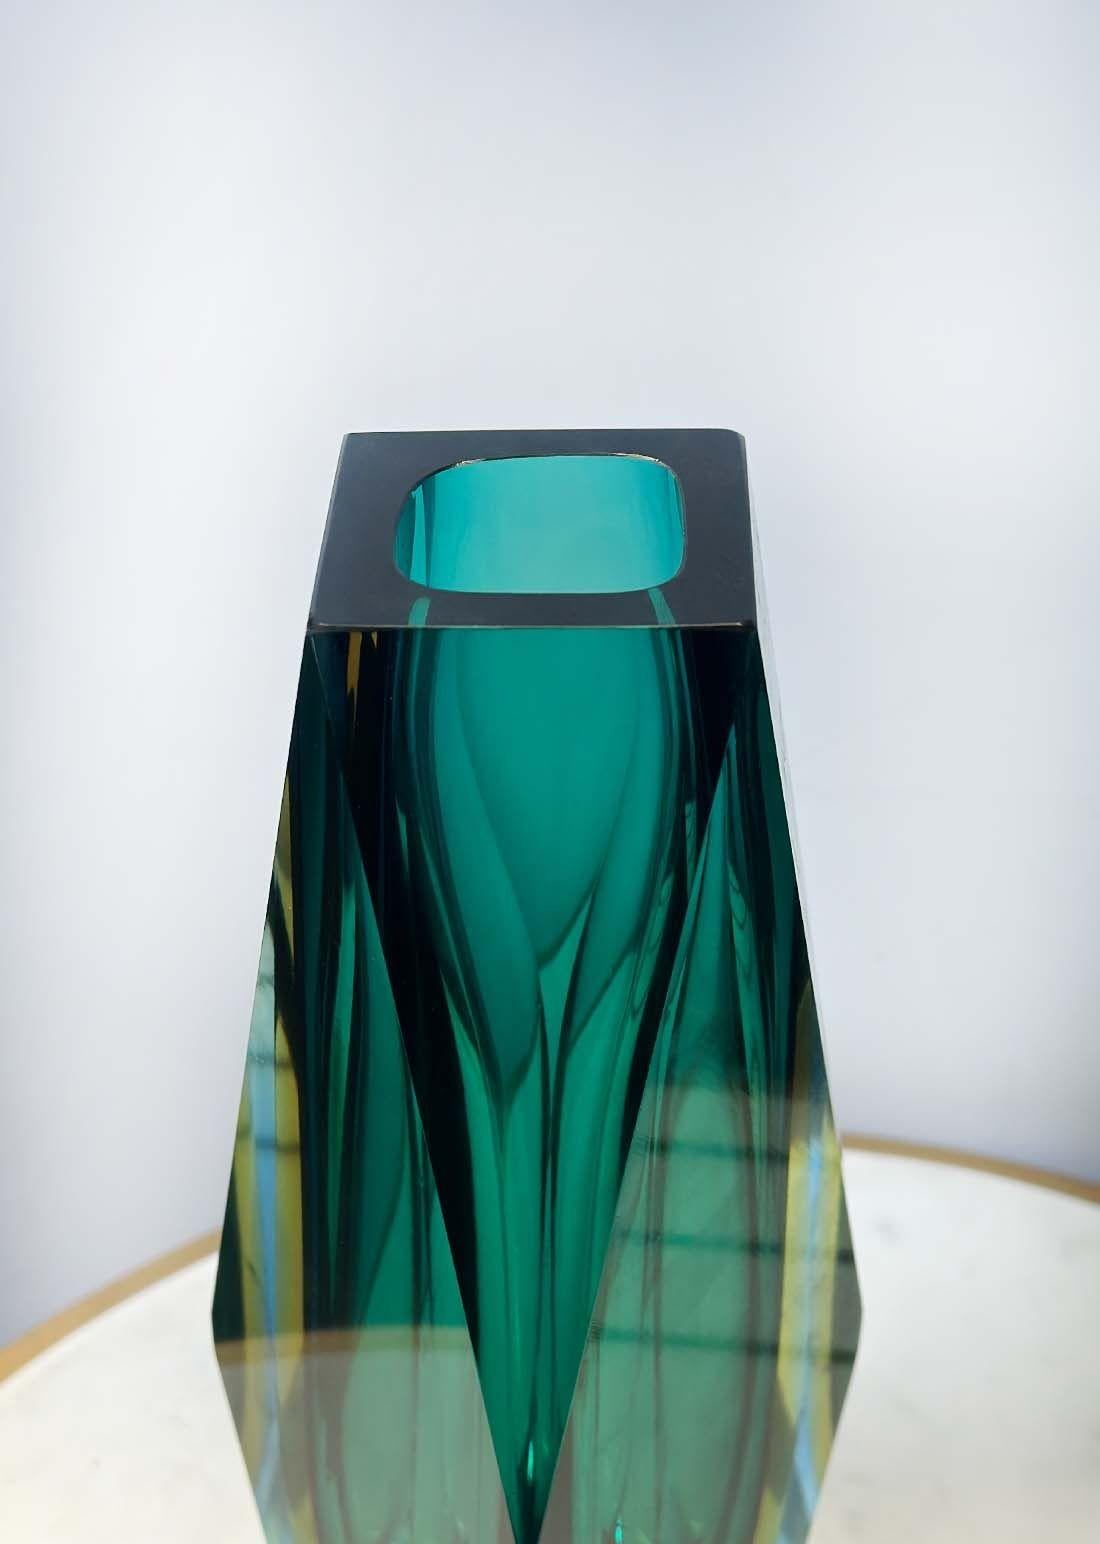 Single vintage vase with dominant turquoise blue, yellow and clear Murano glass, having a unique geometric body. Made in Italy, c. 1960's.
Dimensions:
12